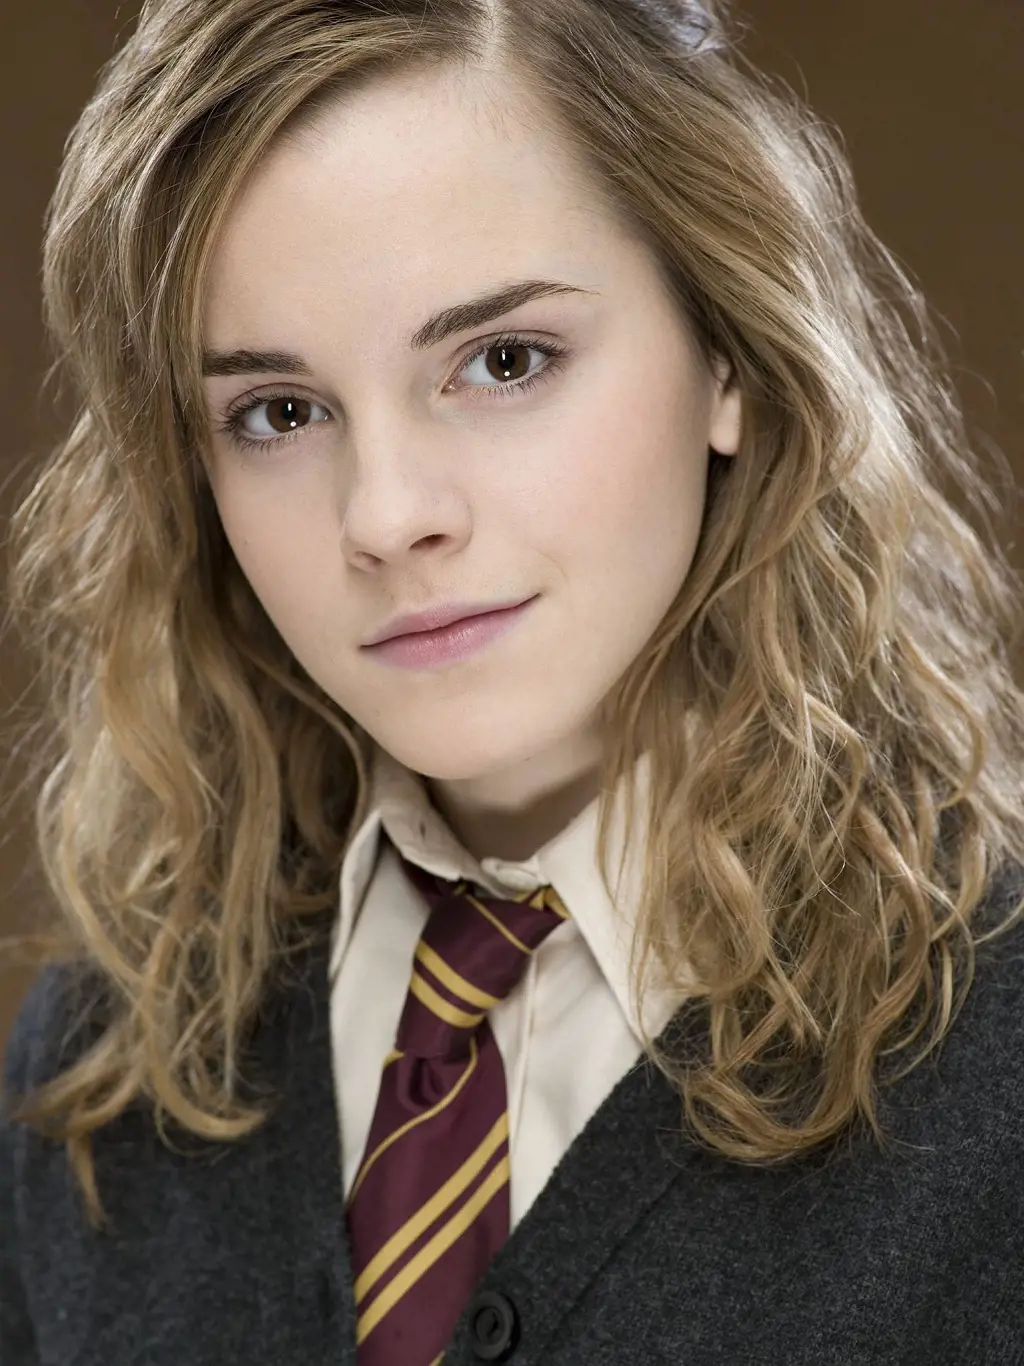 Hermione is a Gryffindor witch known for her bravery, loyalty, and passion for justice.